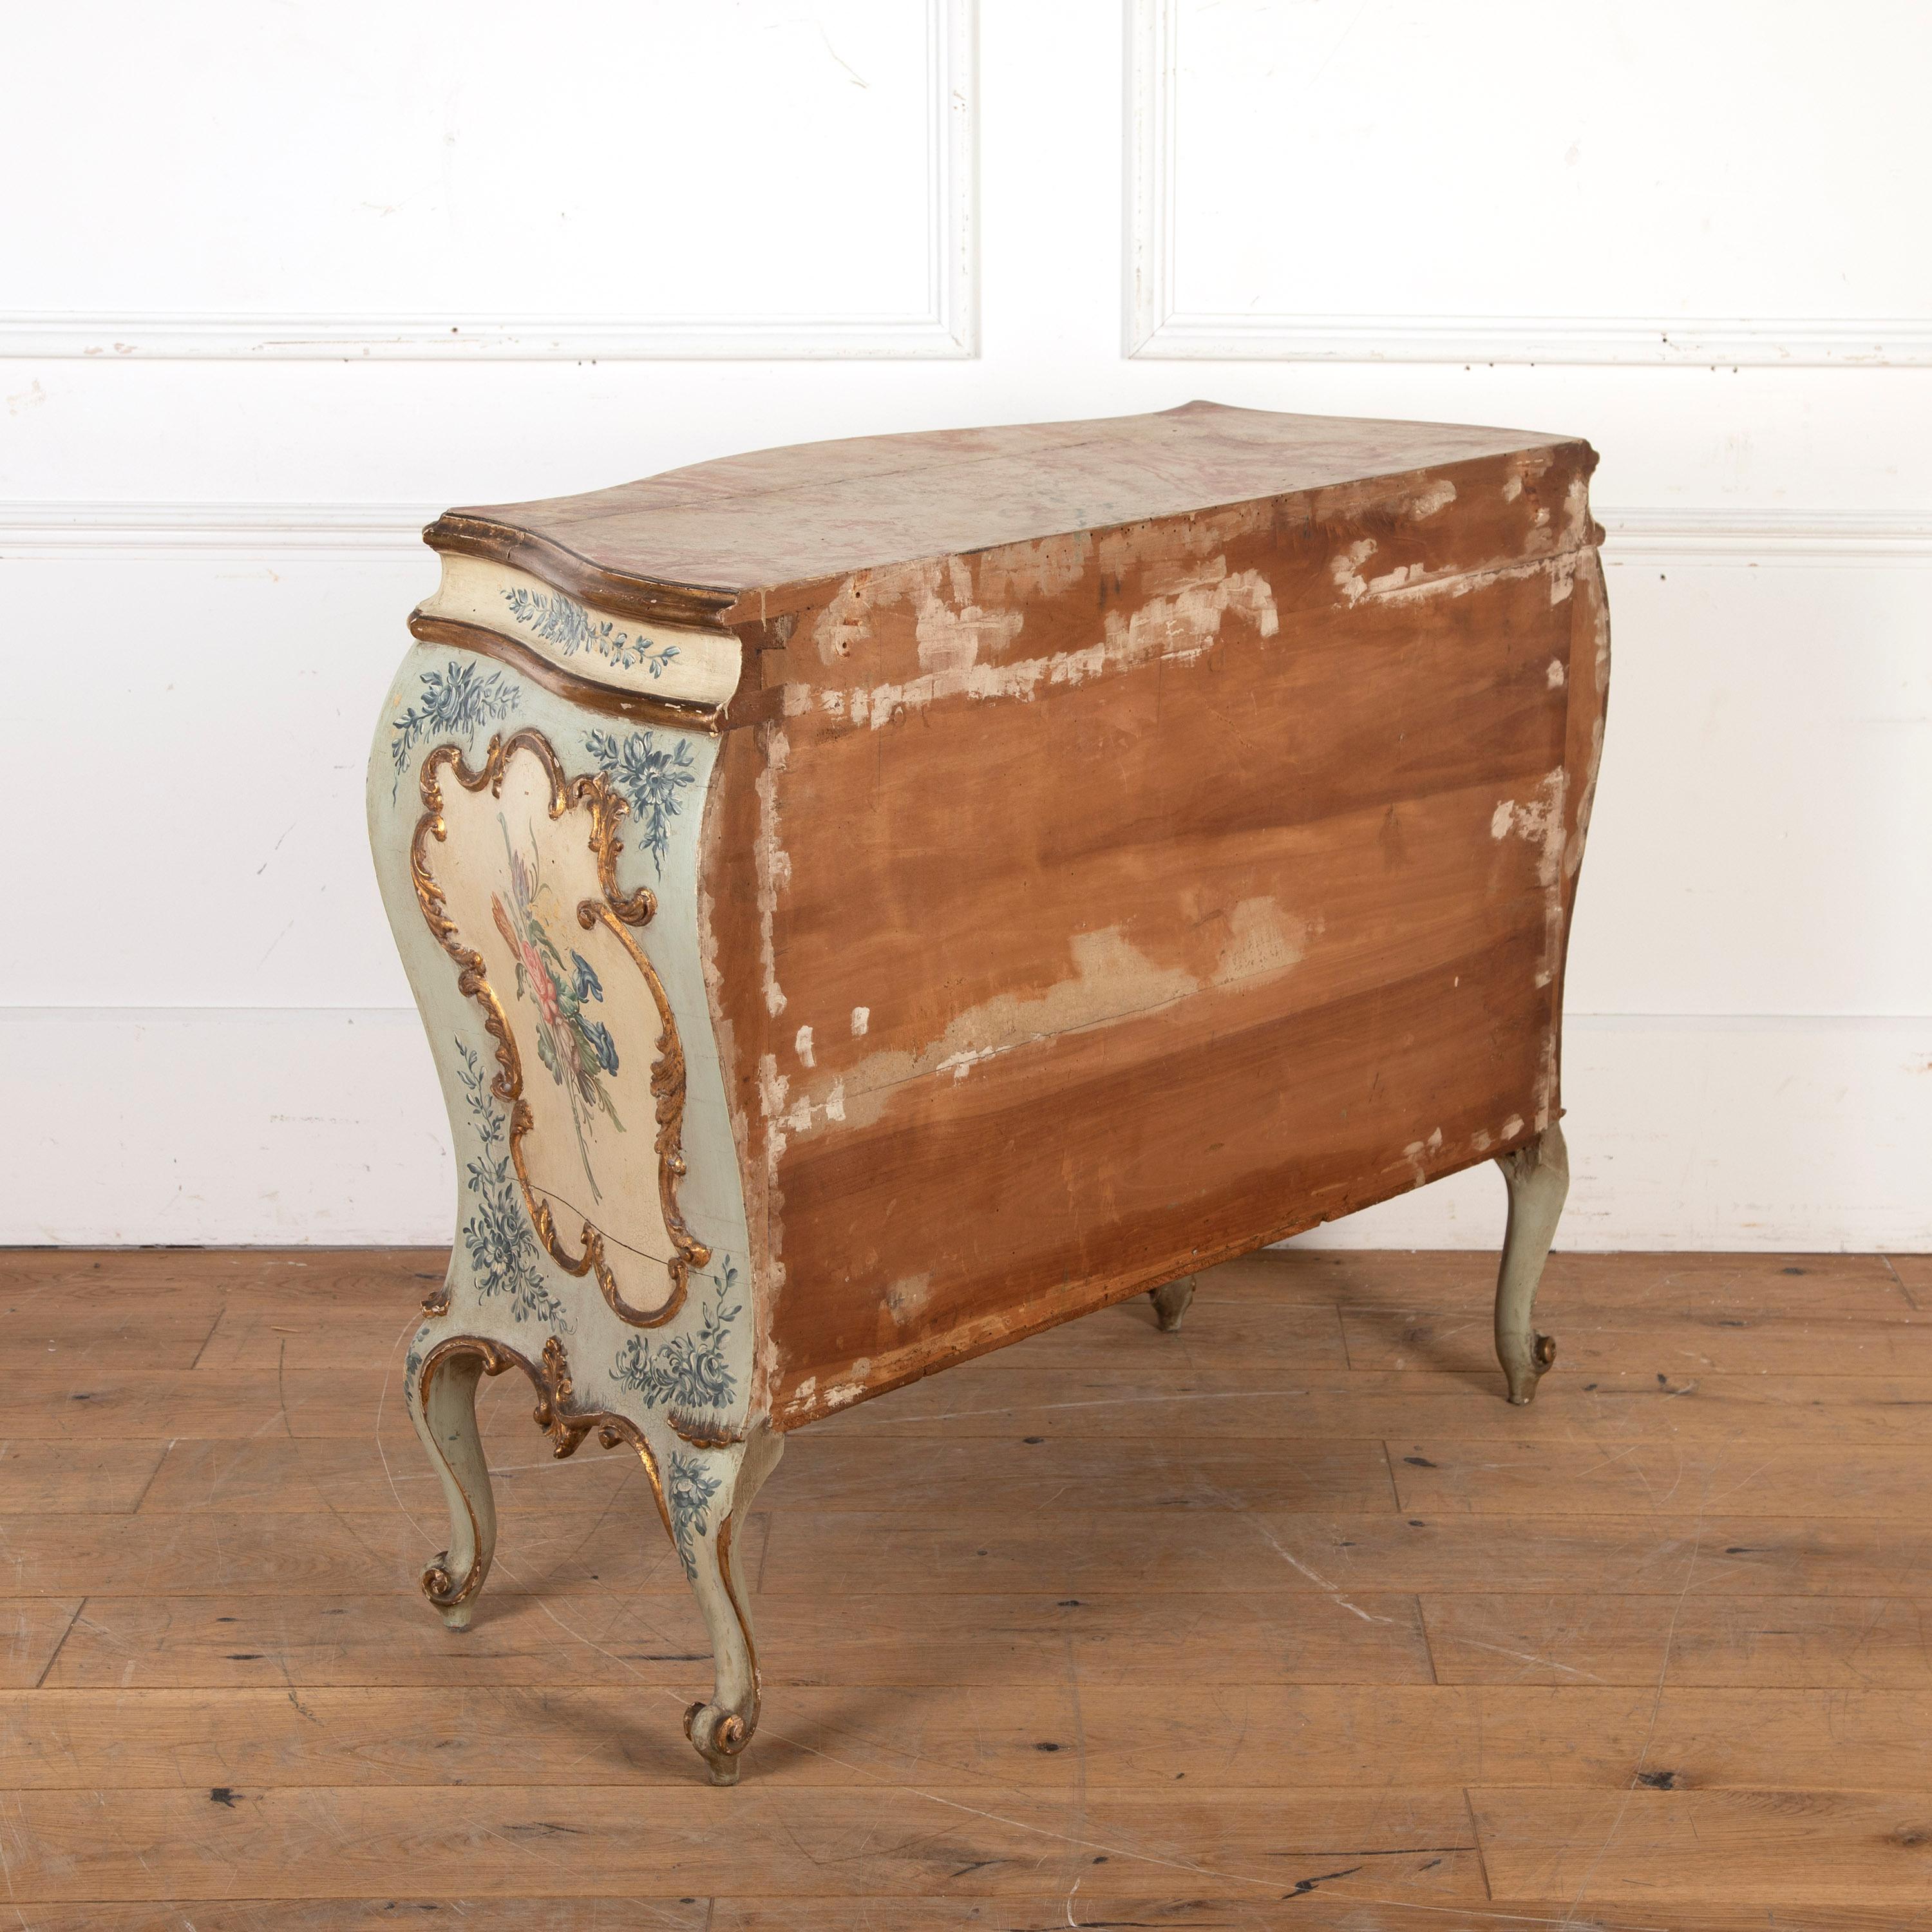 Beautiful early 19th Century Venetian hand-painted and gilt bombe commode.

Features two large drawers that open with their working keys. This commode is in its original and beautifully patinated finish.

The top is painted faux marble and has